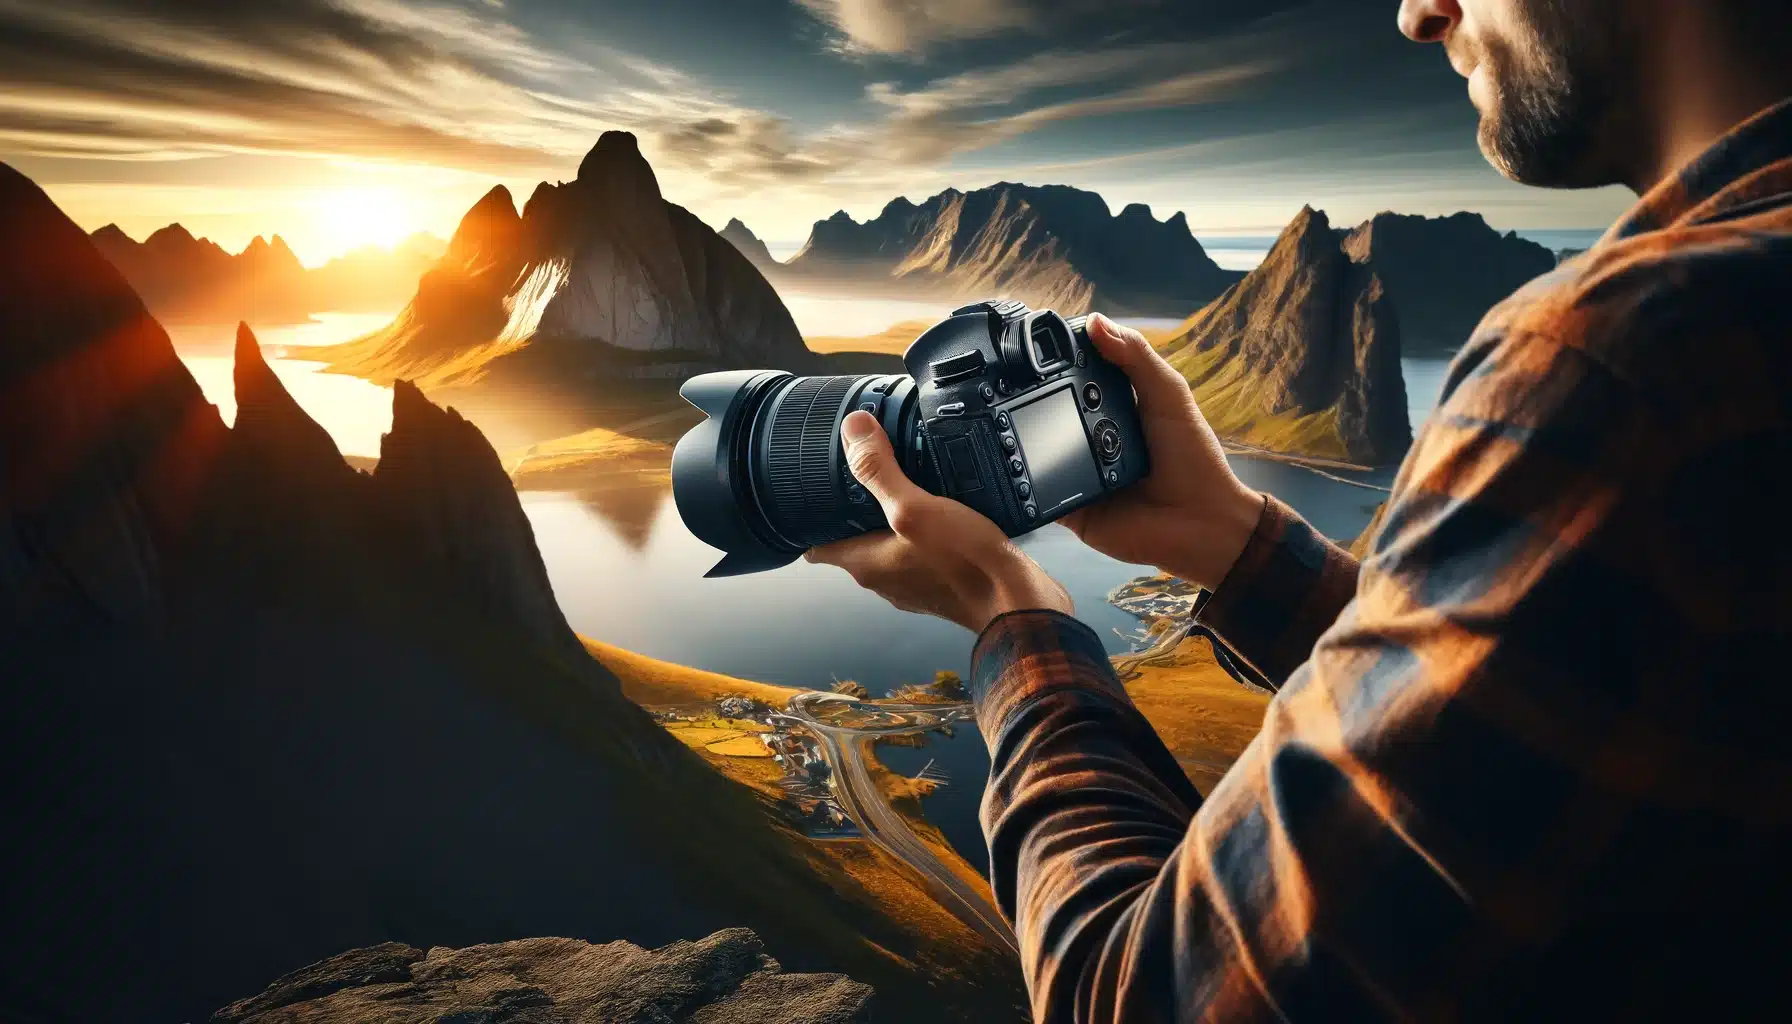 Photographer using a high-end camera to capture a scenic mountain landscape.